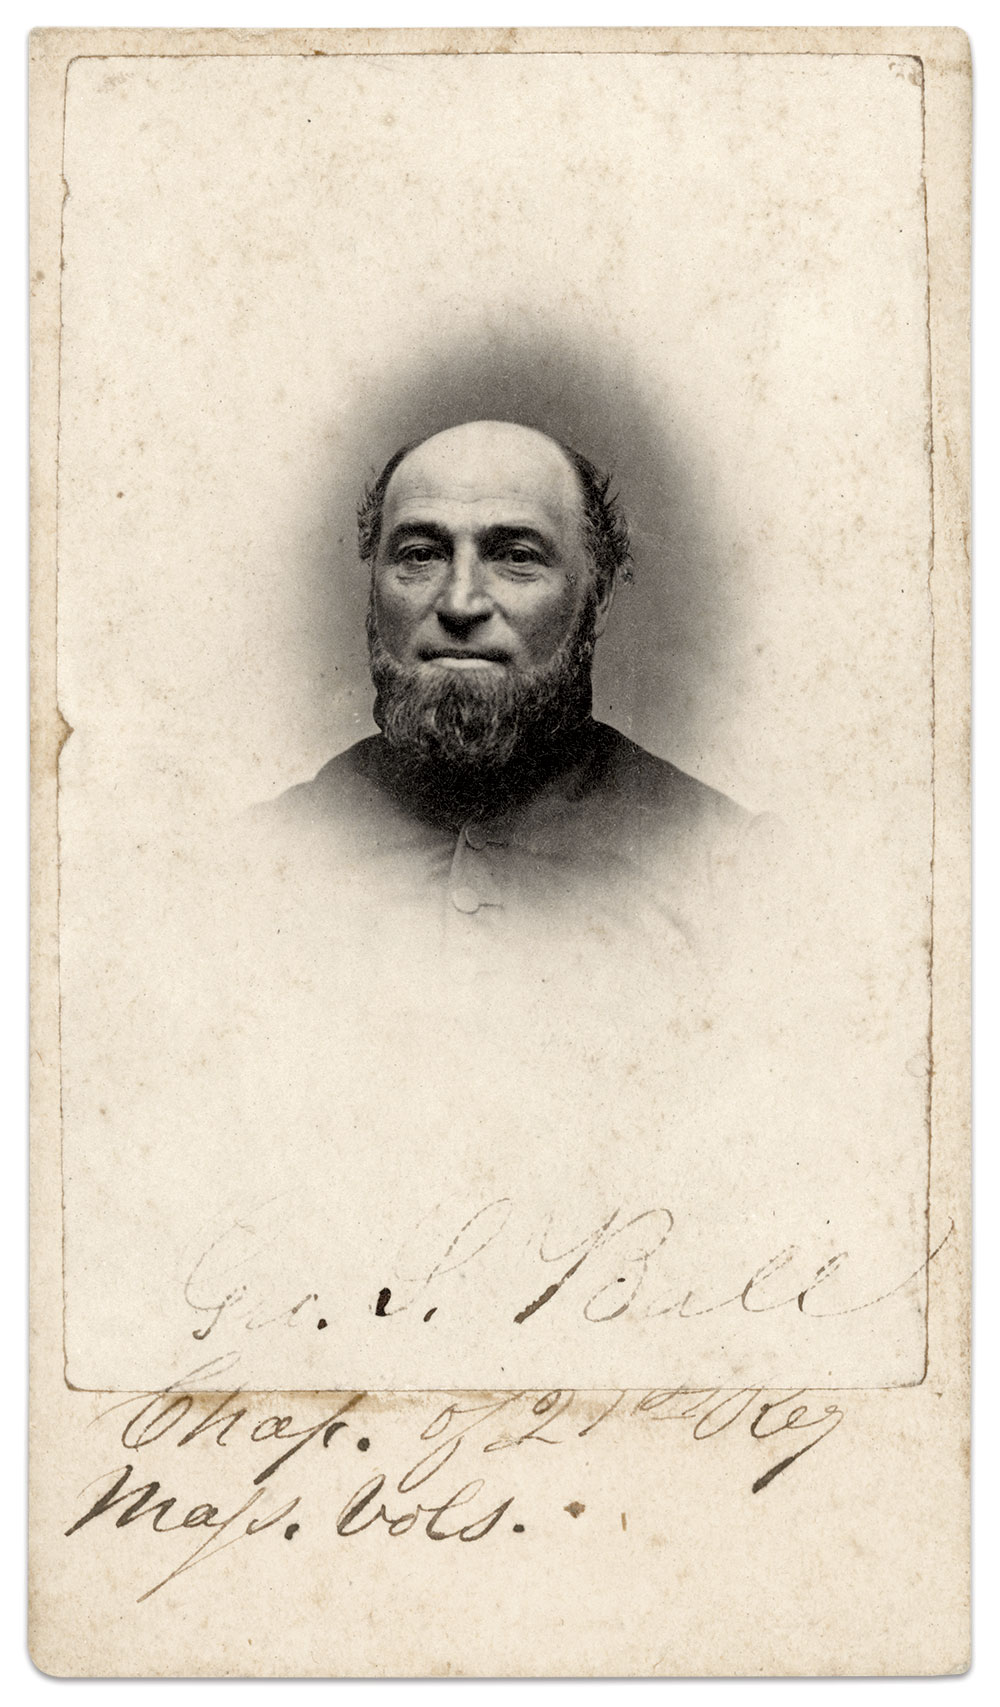 George Sumner Ball (1822-1902), a Unitarian minister, left a positive and lasting impression on the men of the 21st as moral leader, postmaster and nurse. Carte de visite by Charles T. Sylvester of Boston, Mass.